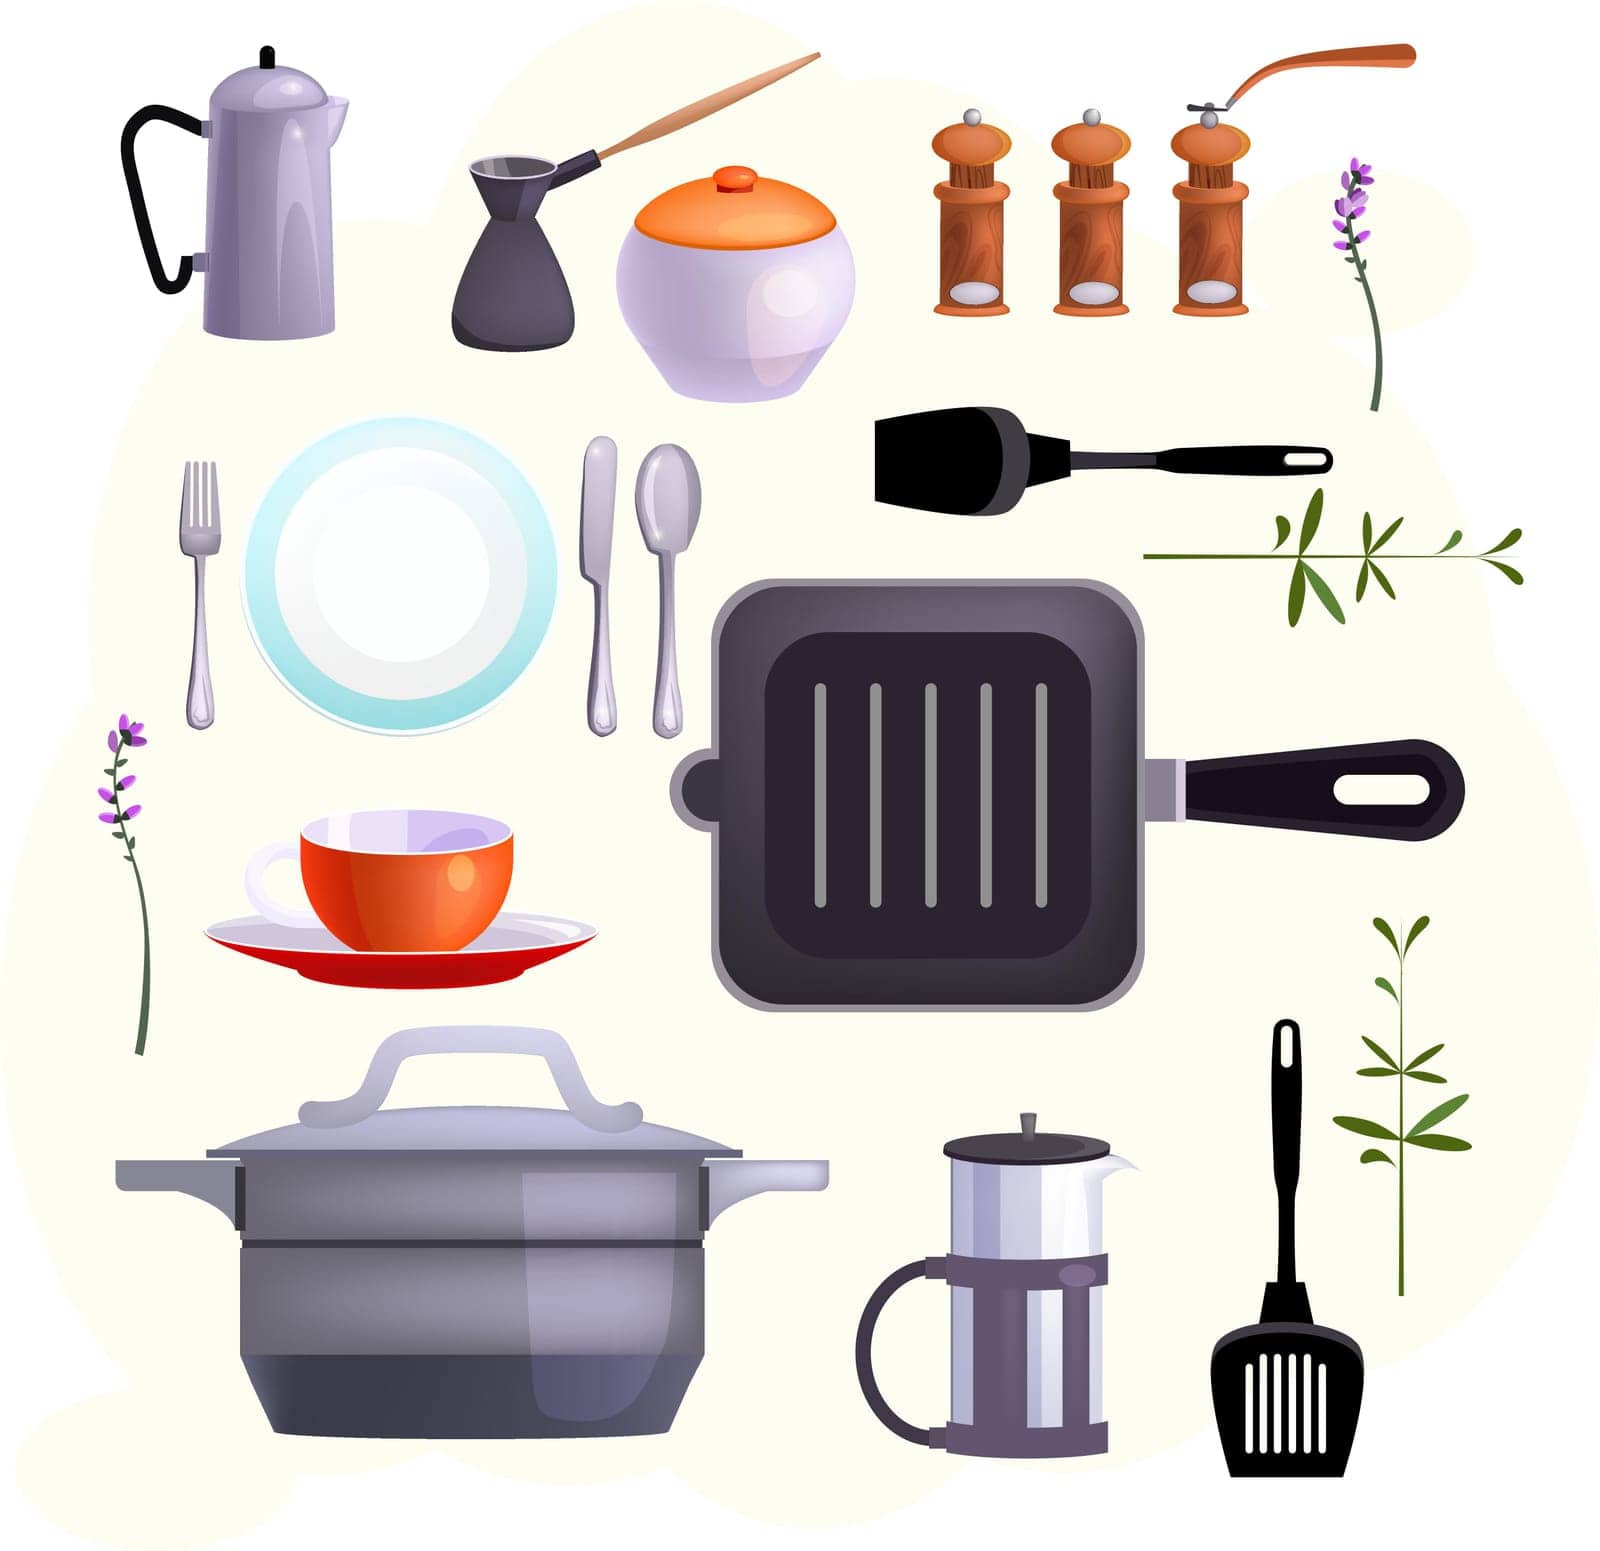 Kitchen equipment icons by pchvector